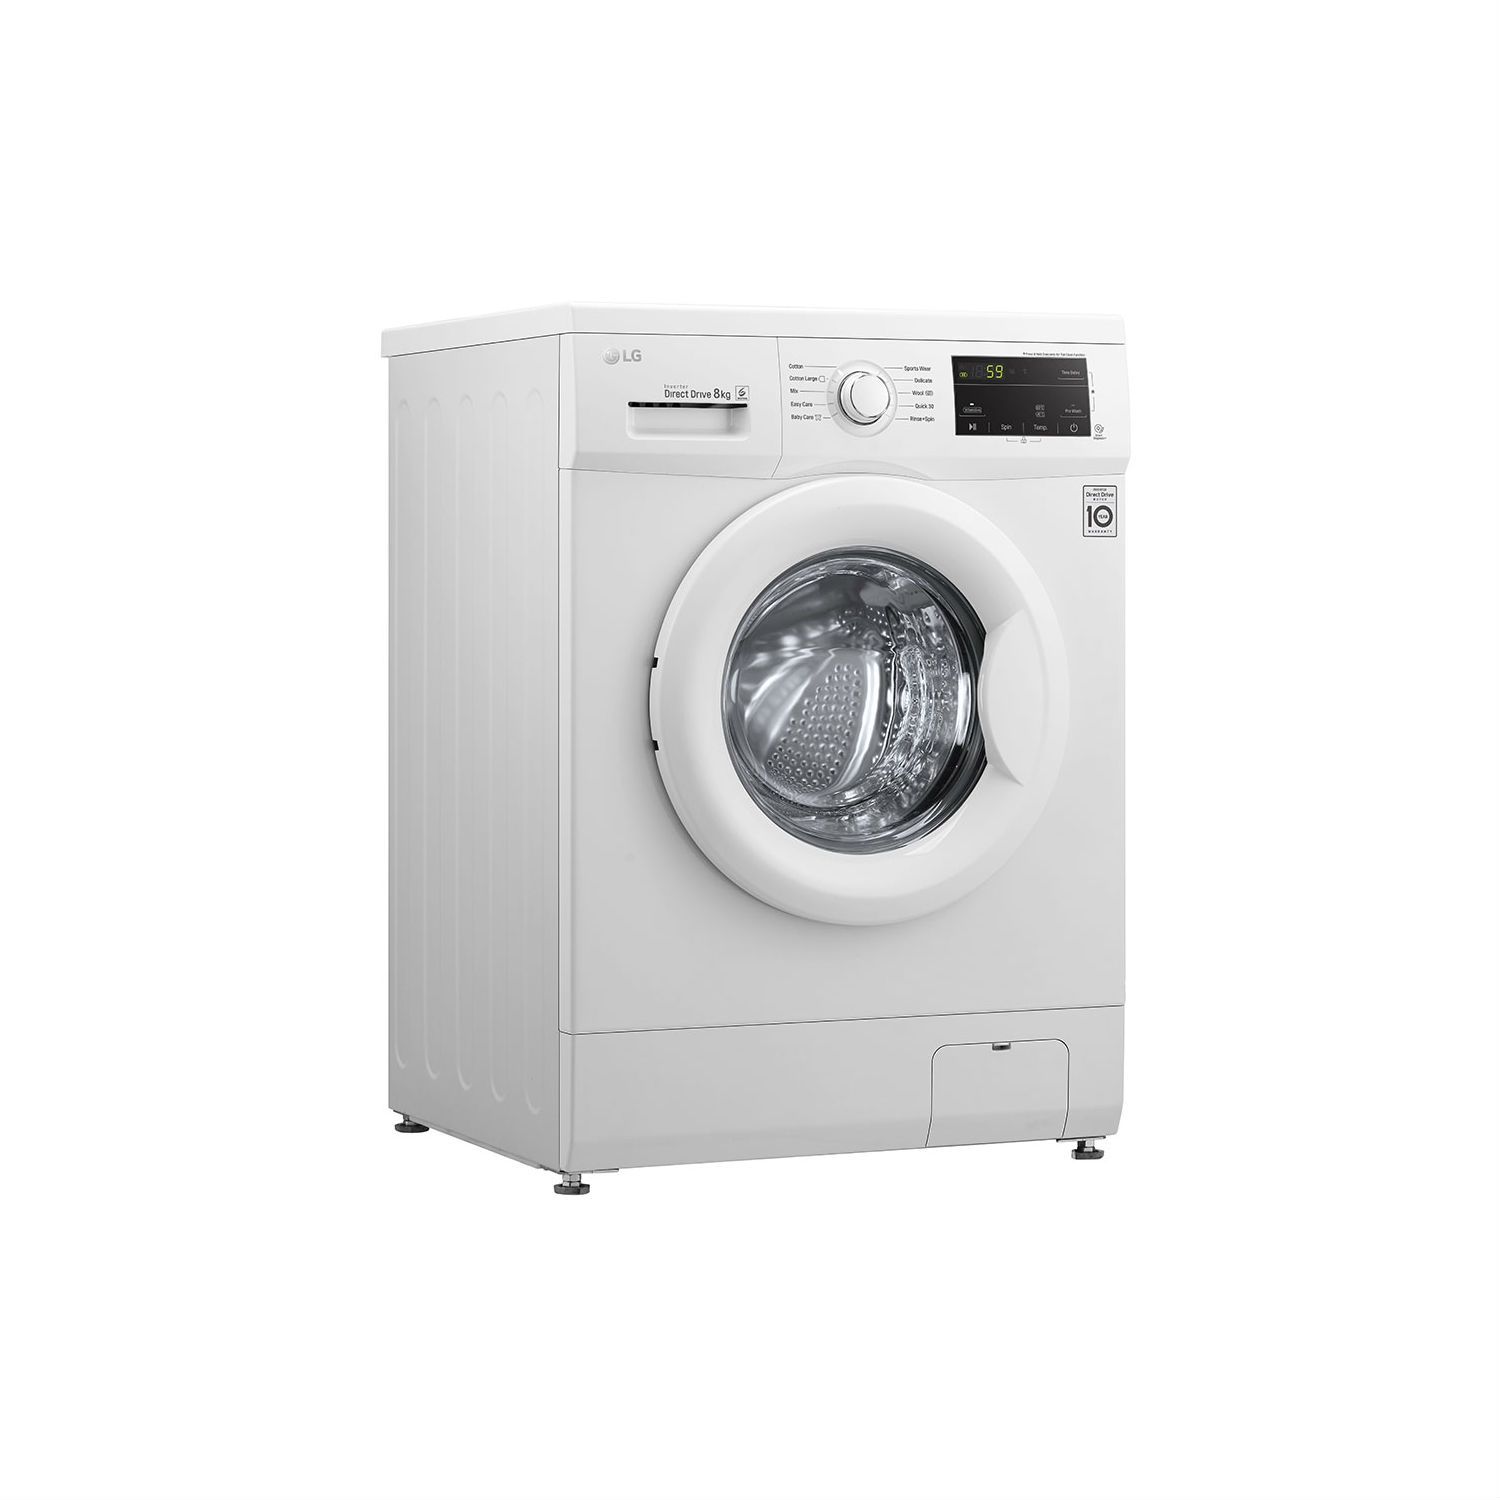 LG ELECTRONICS 8 kg 1400 Inverter Direct Drive Washing Machine - WHITE - A+++-30% Energy Rated - 2